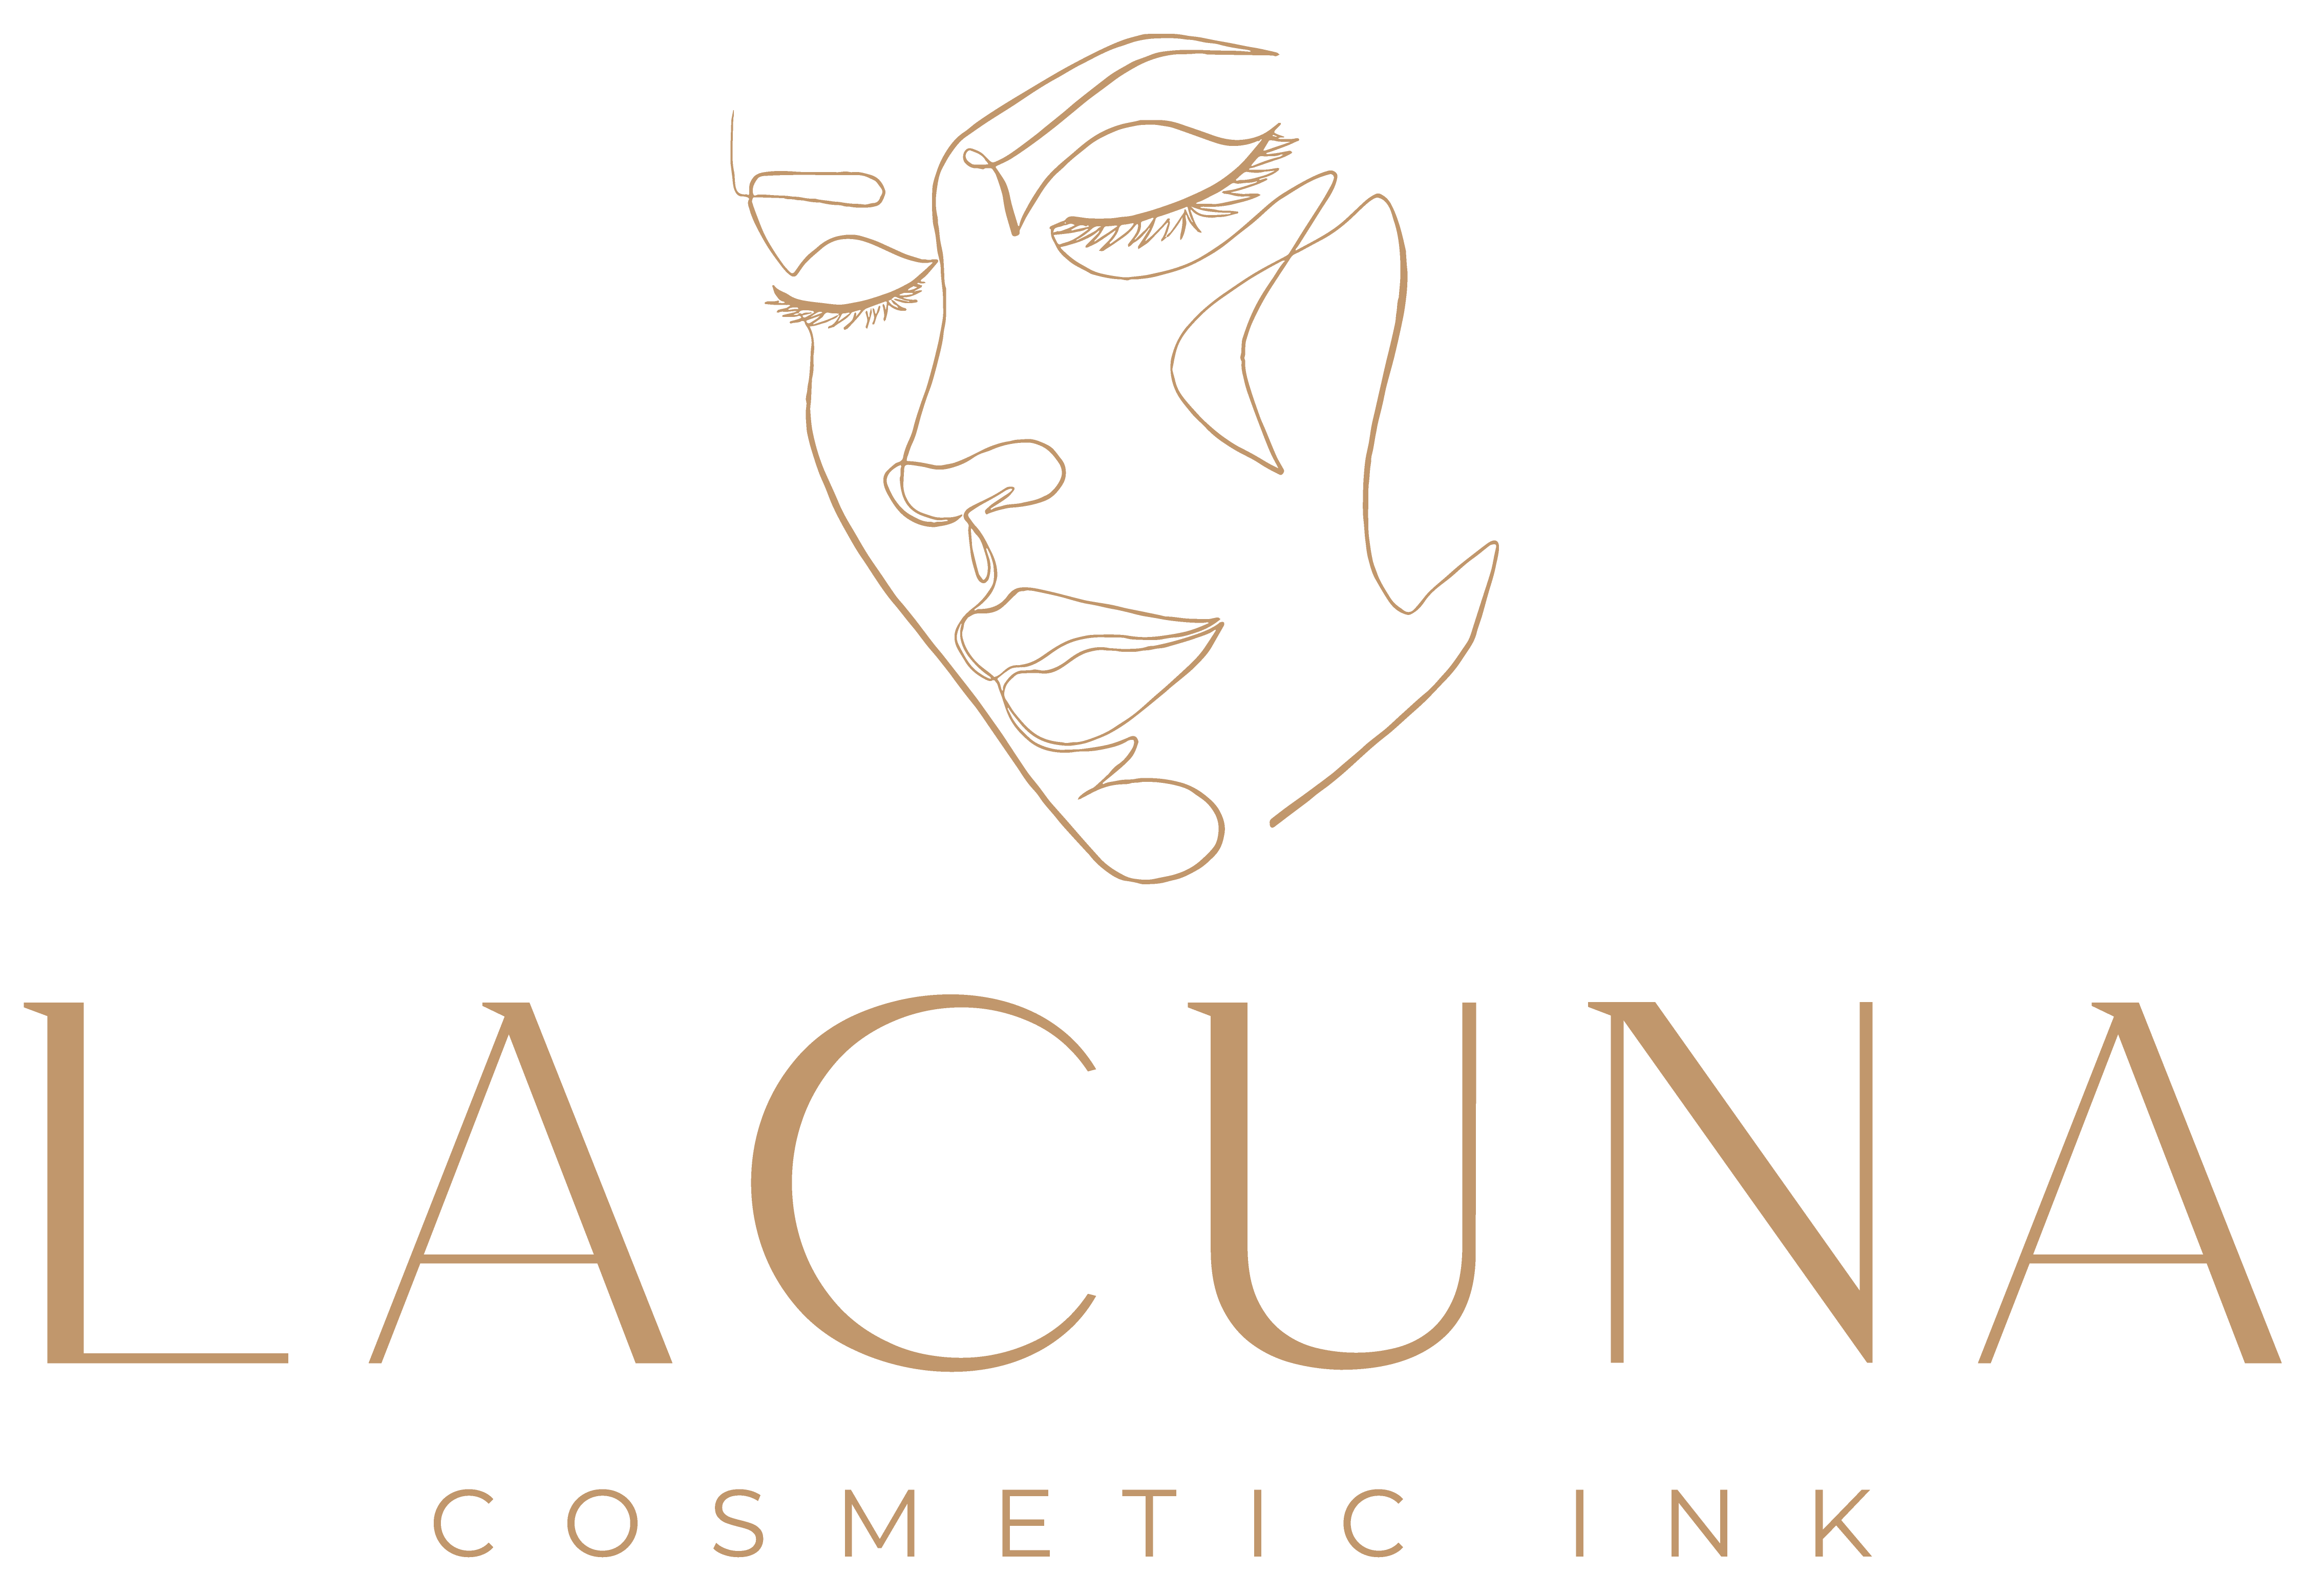 Lacuna Cosmetic Ink